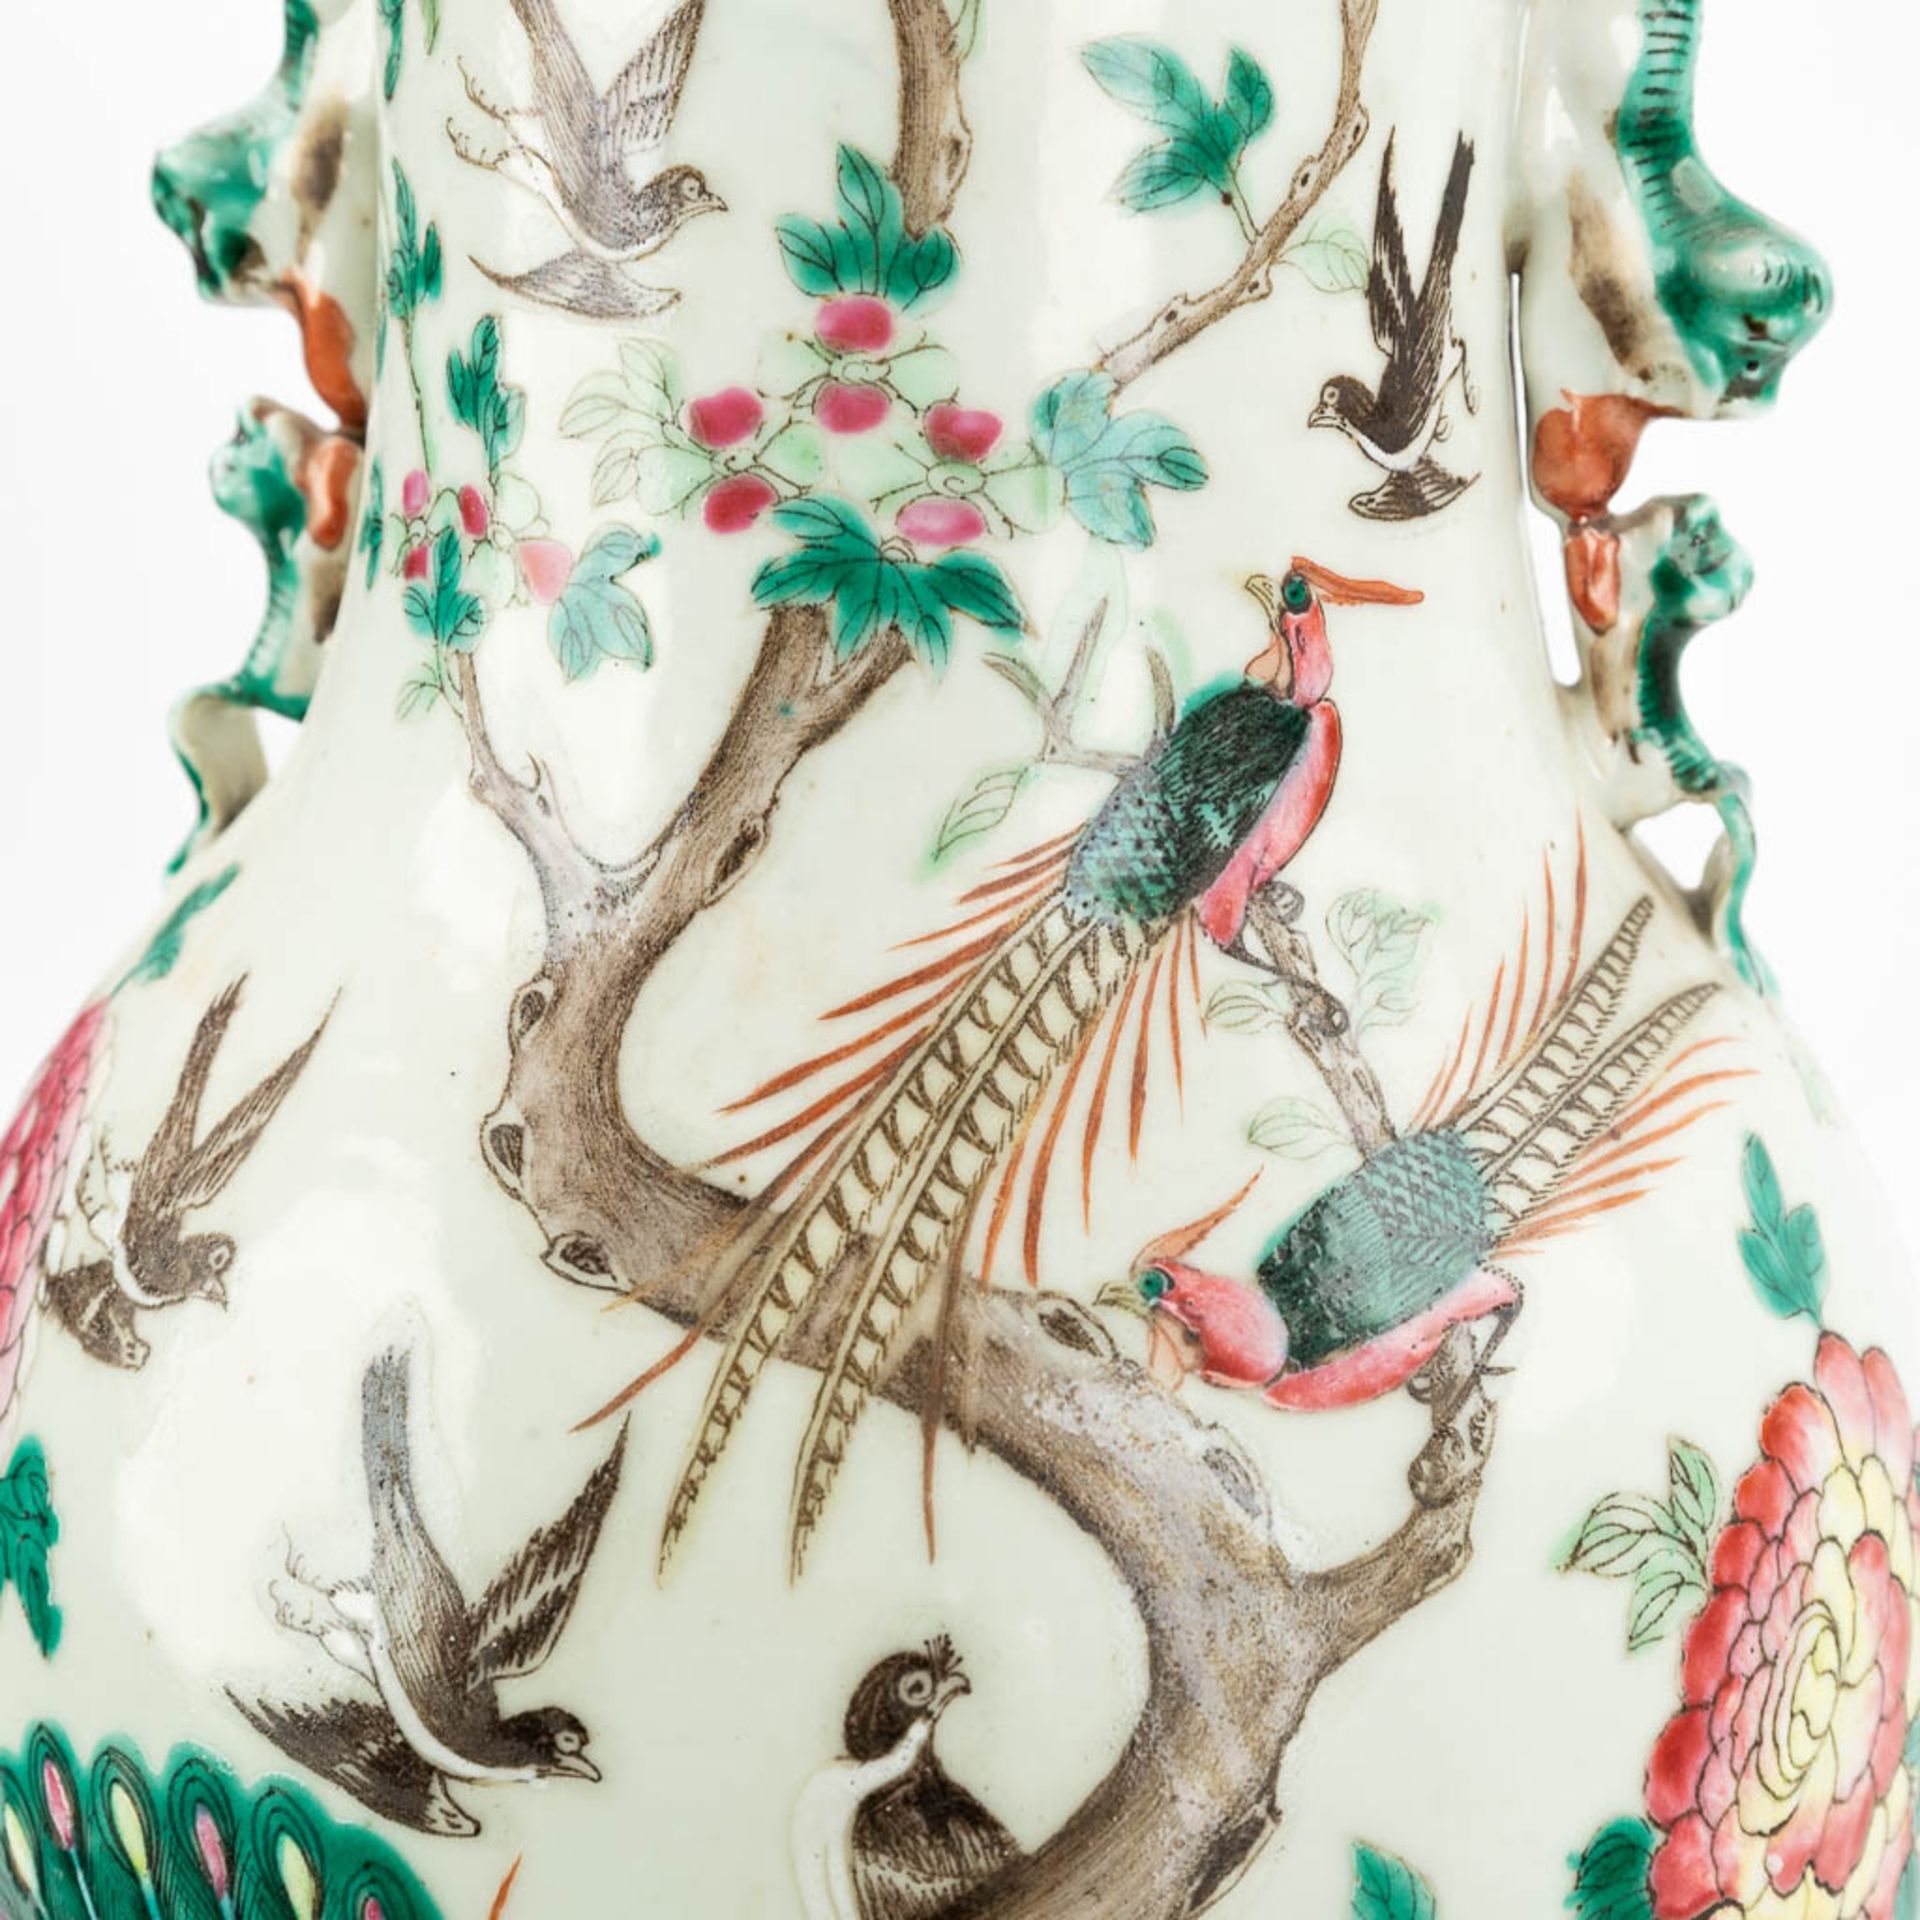 A Chinese vase made of porcelain, decorated with peacocks and birds. (61,5 x 24 cm) - Image 12 of 18